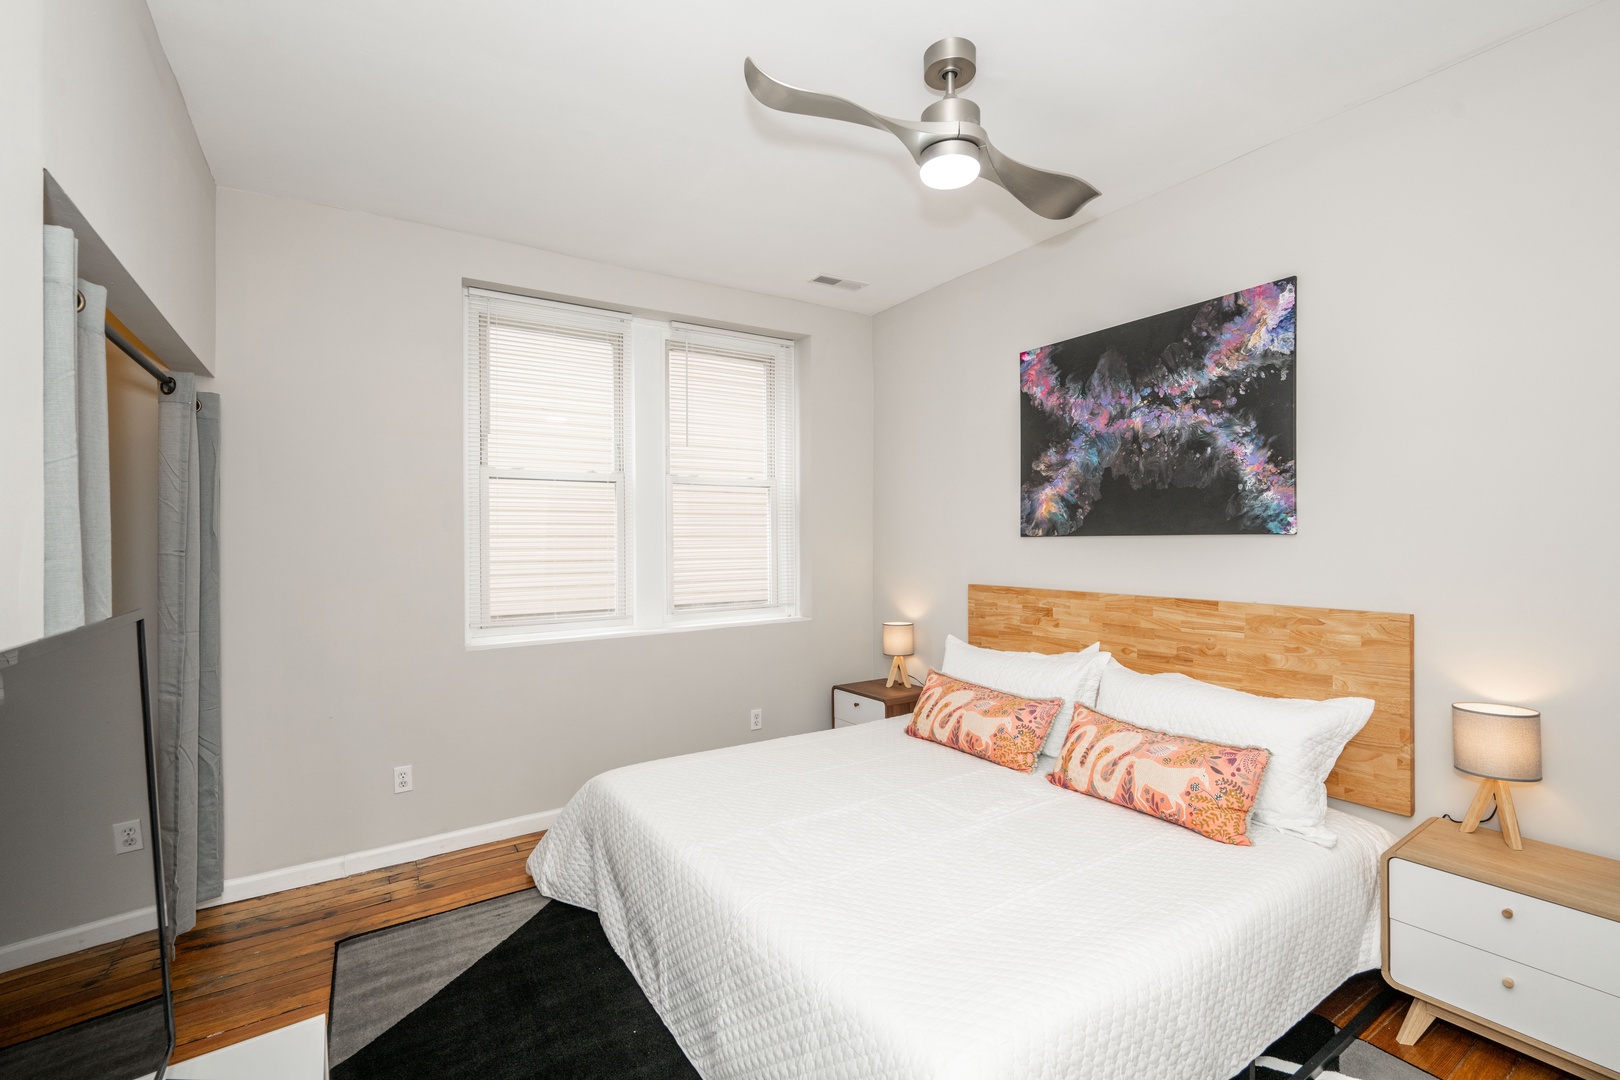 The second bedroom sanctuary offers a king-sized bed & Smart TV